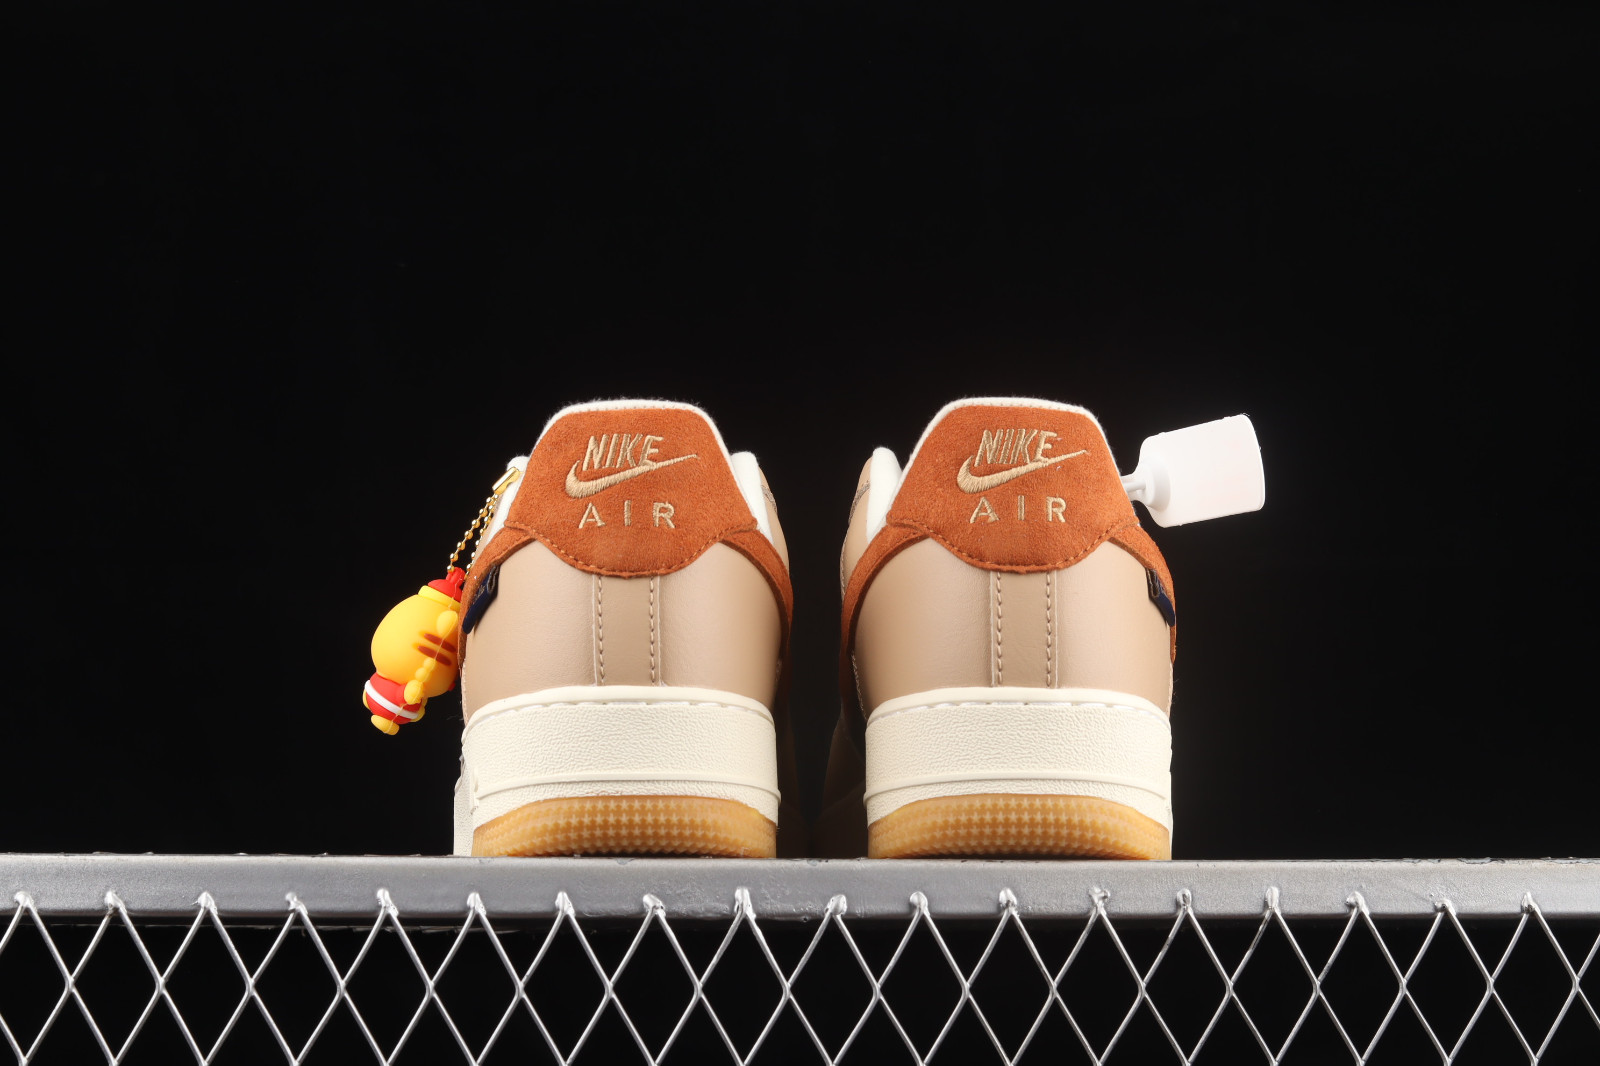 Nike Air Force 1 '07 ESS sneakers in white and brown